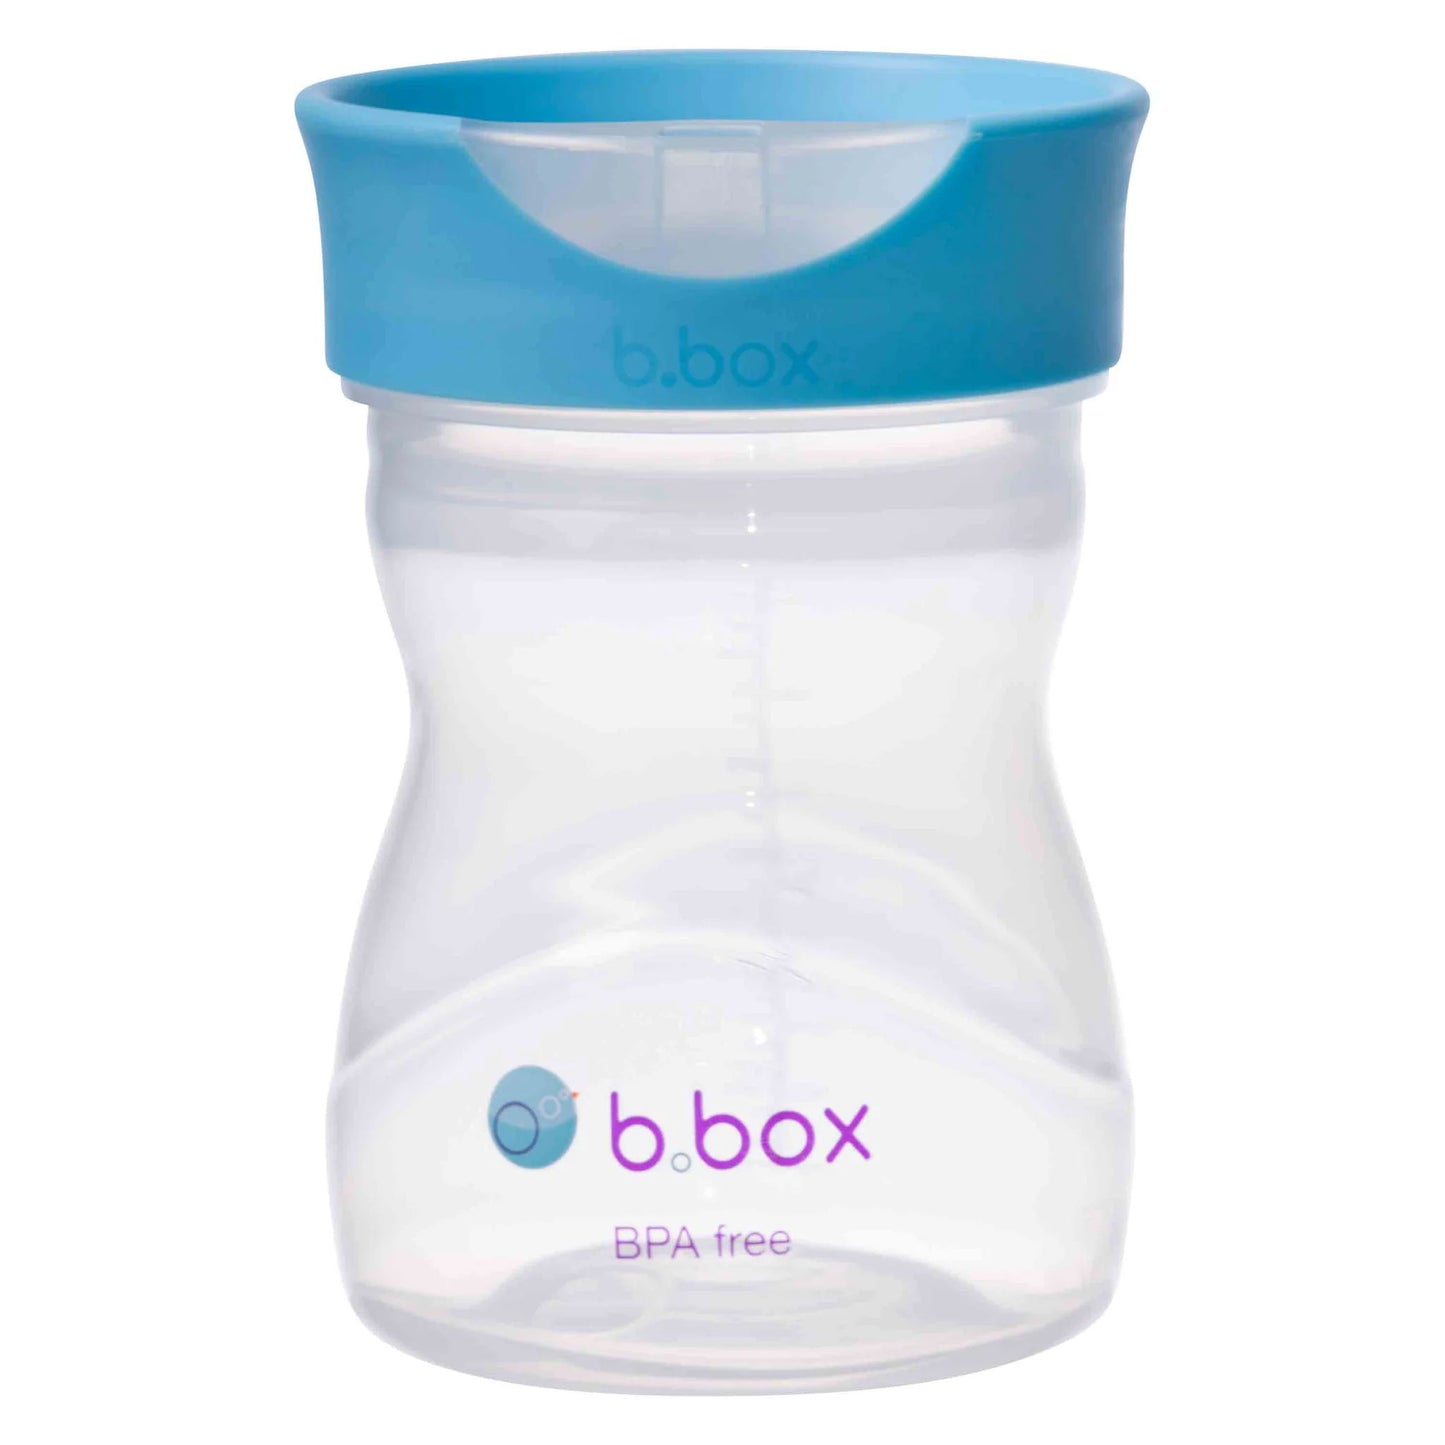 The b.box Training Cup mimics the flow of a big kids cup, by funnelling liquids into the rim for easy free-flow drinking. 